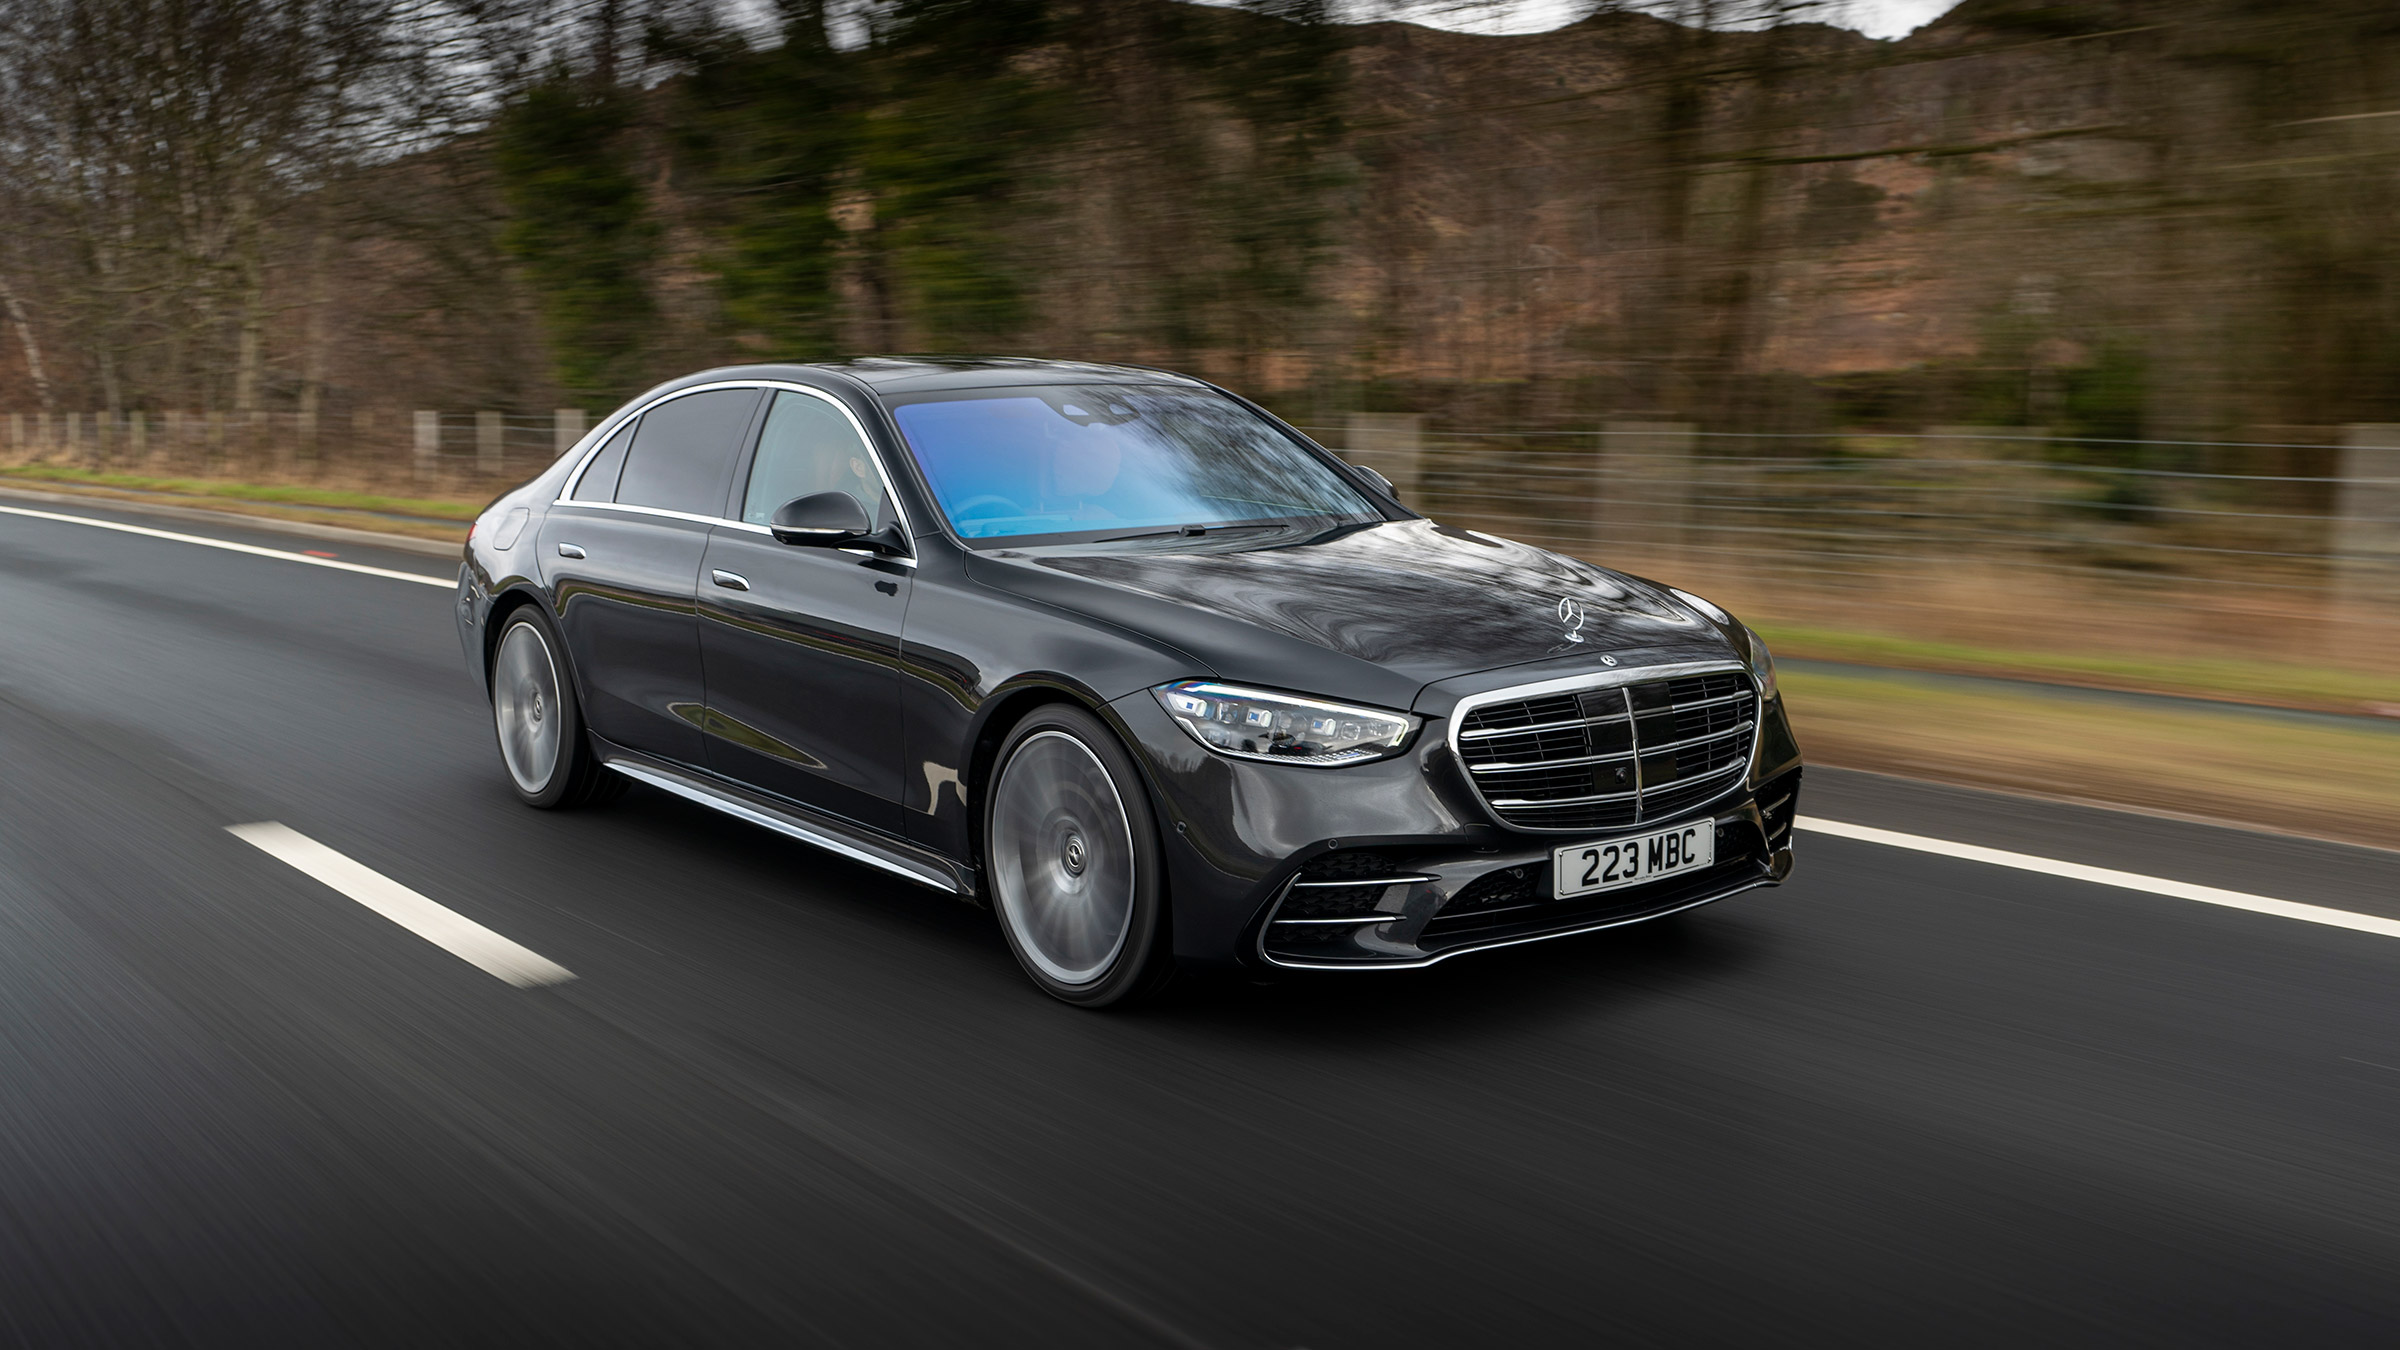 Mercedes S Class 21 Review The Best Car In The World Just Got Better Evo